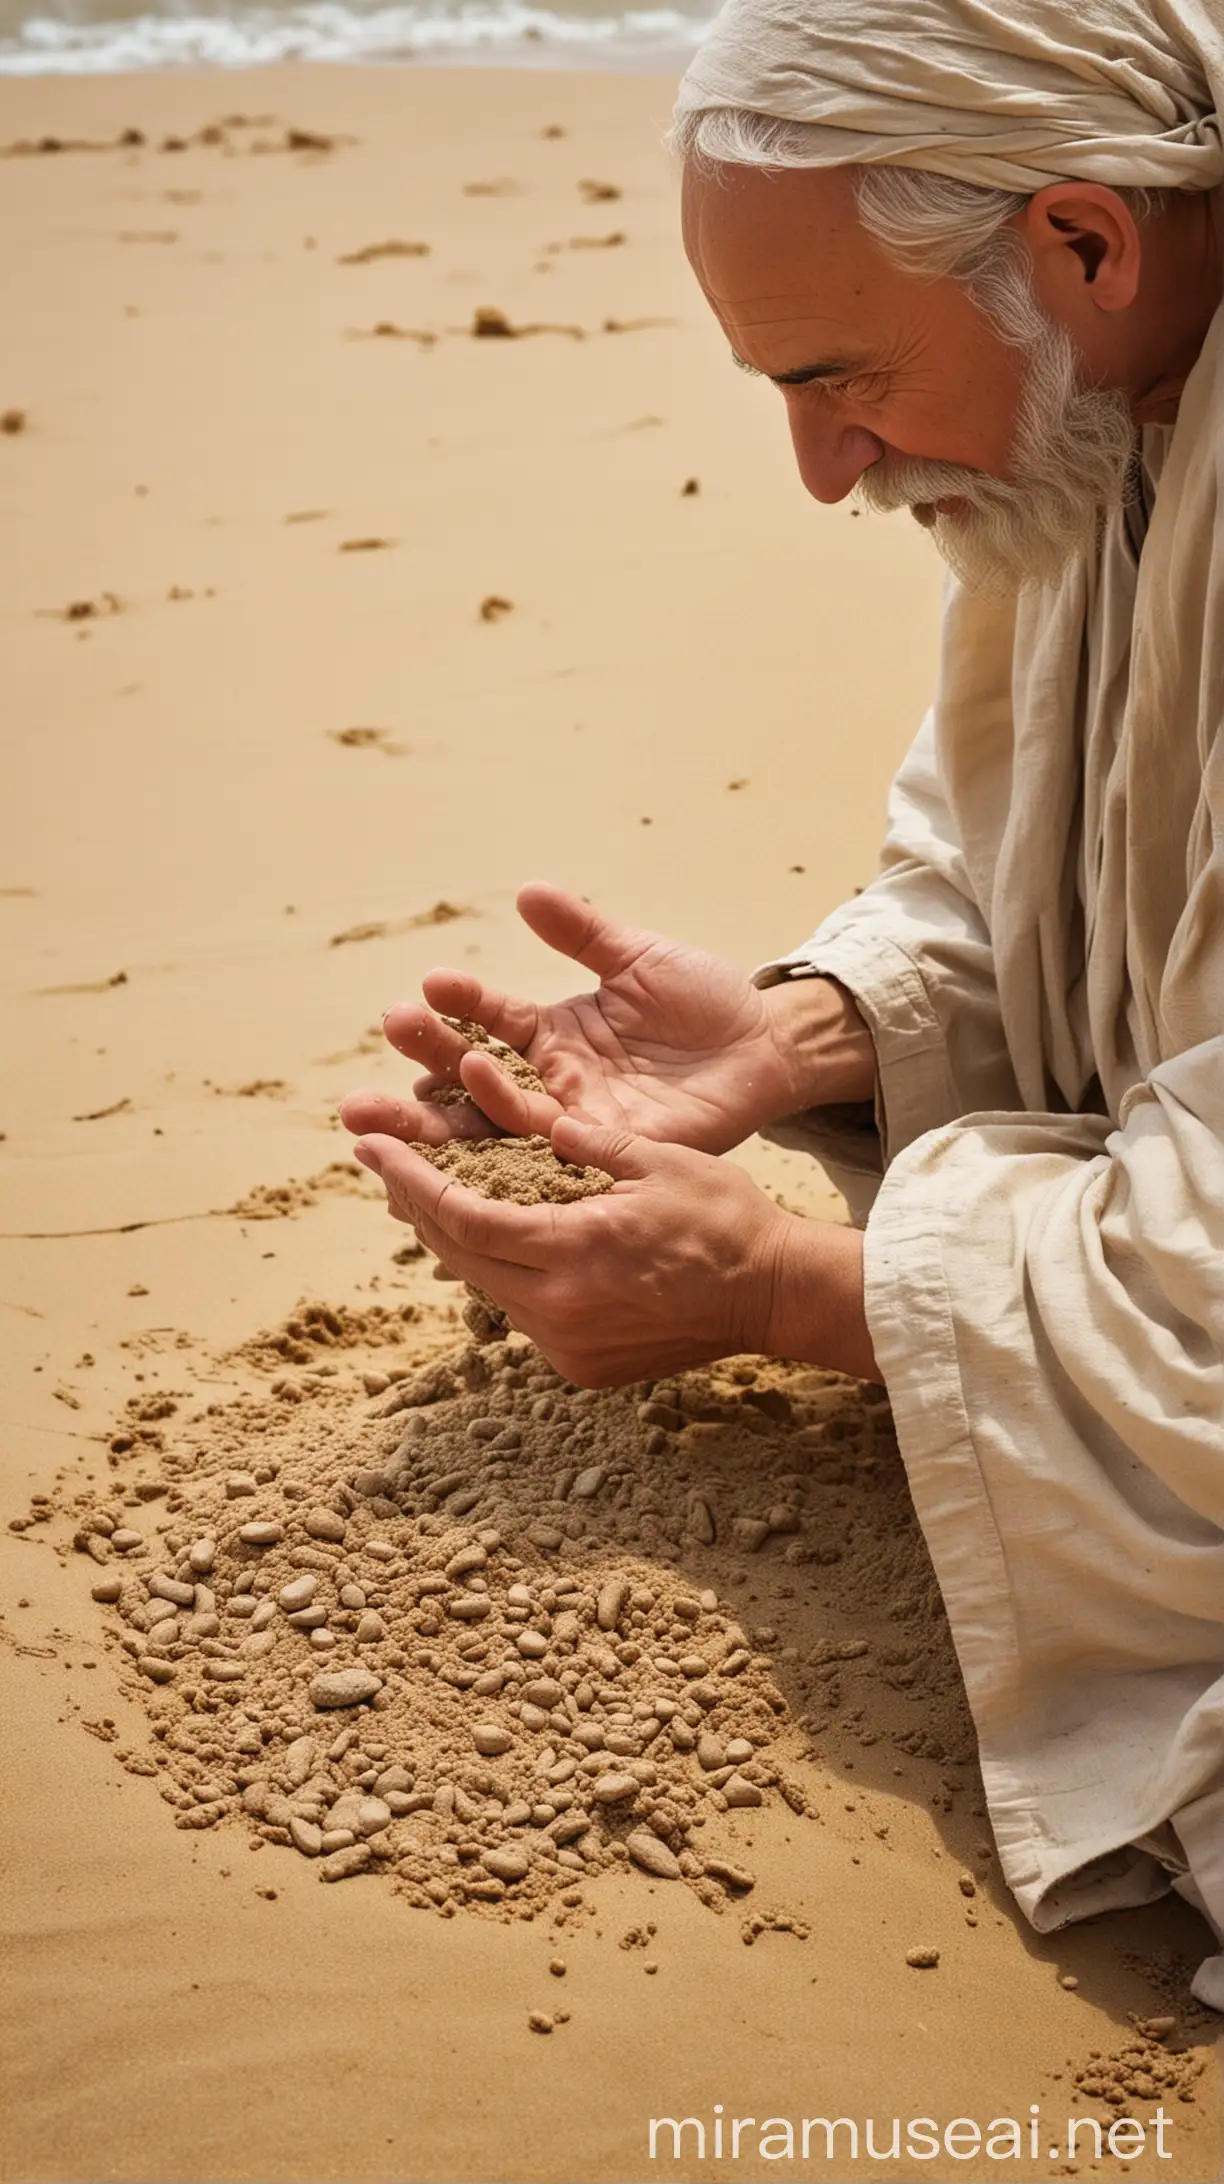 Wise Man Contemplating the Sands of Human Life